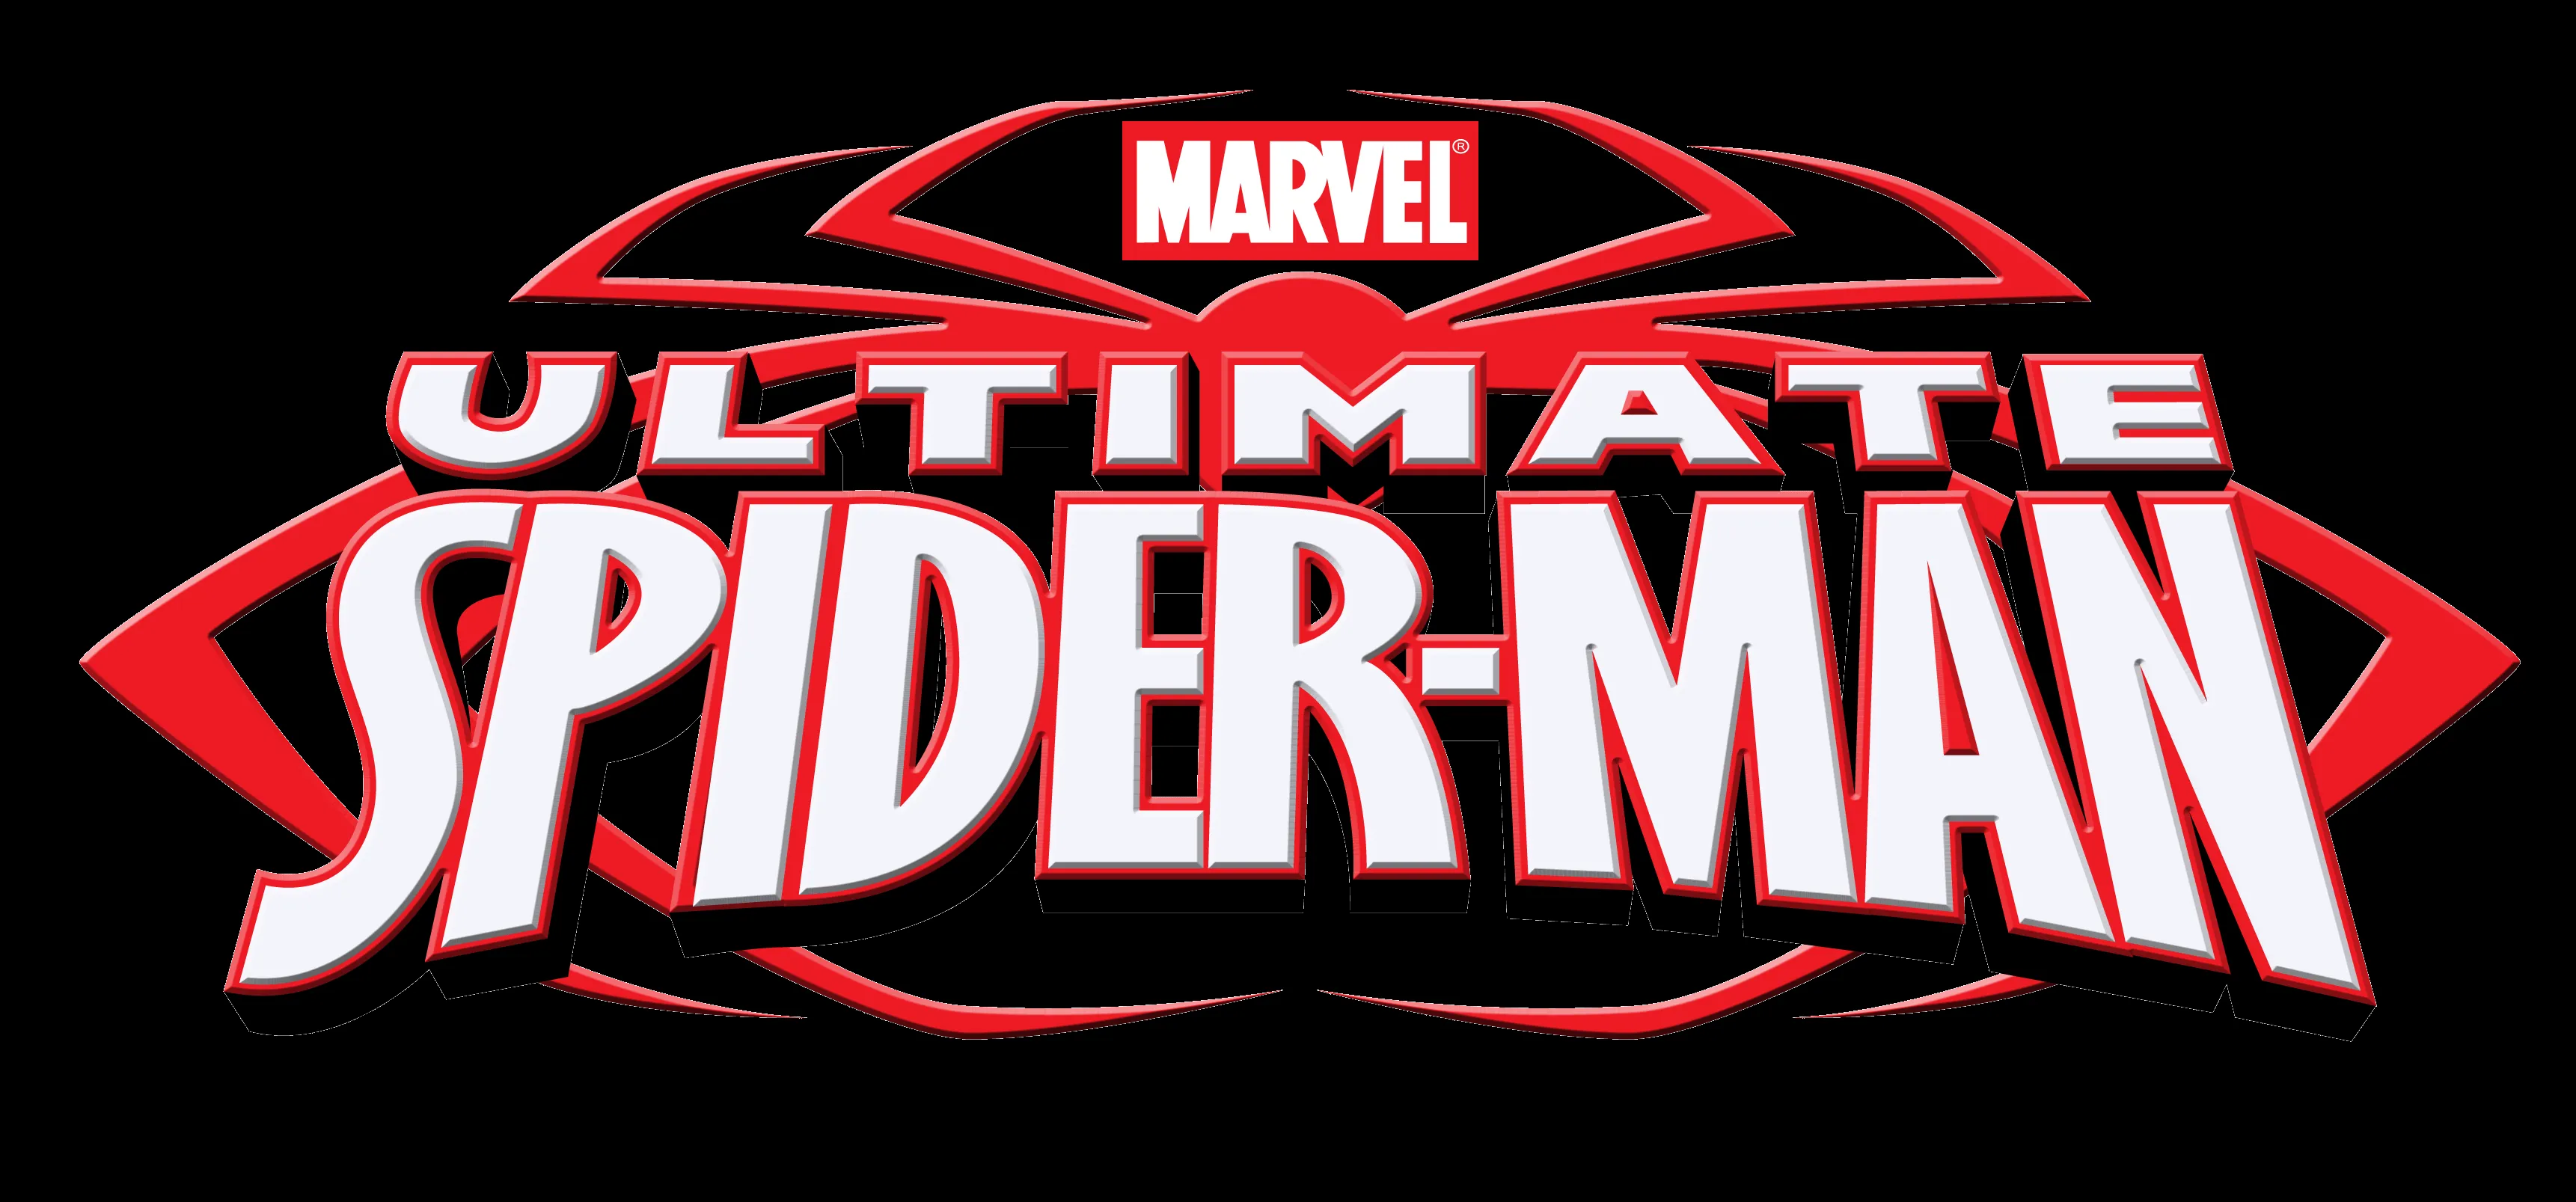 Image - Ultimate Spider-Man.png - Logopedia, the logo and branding ...